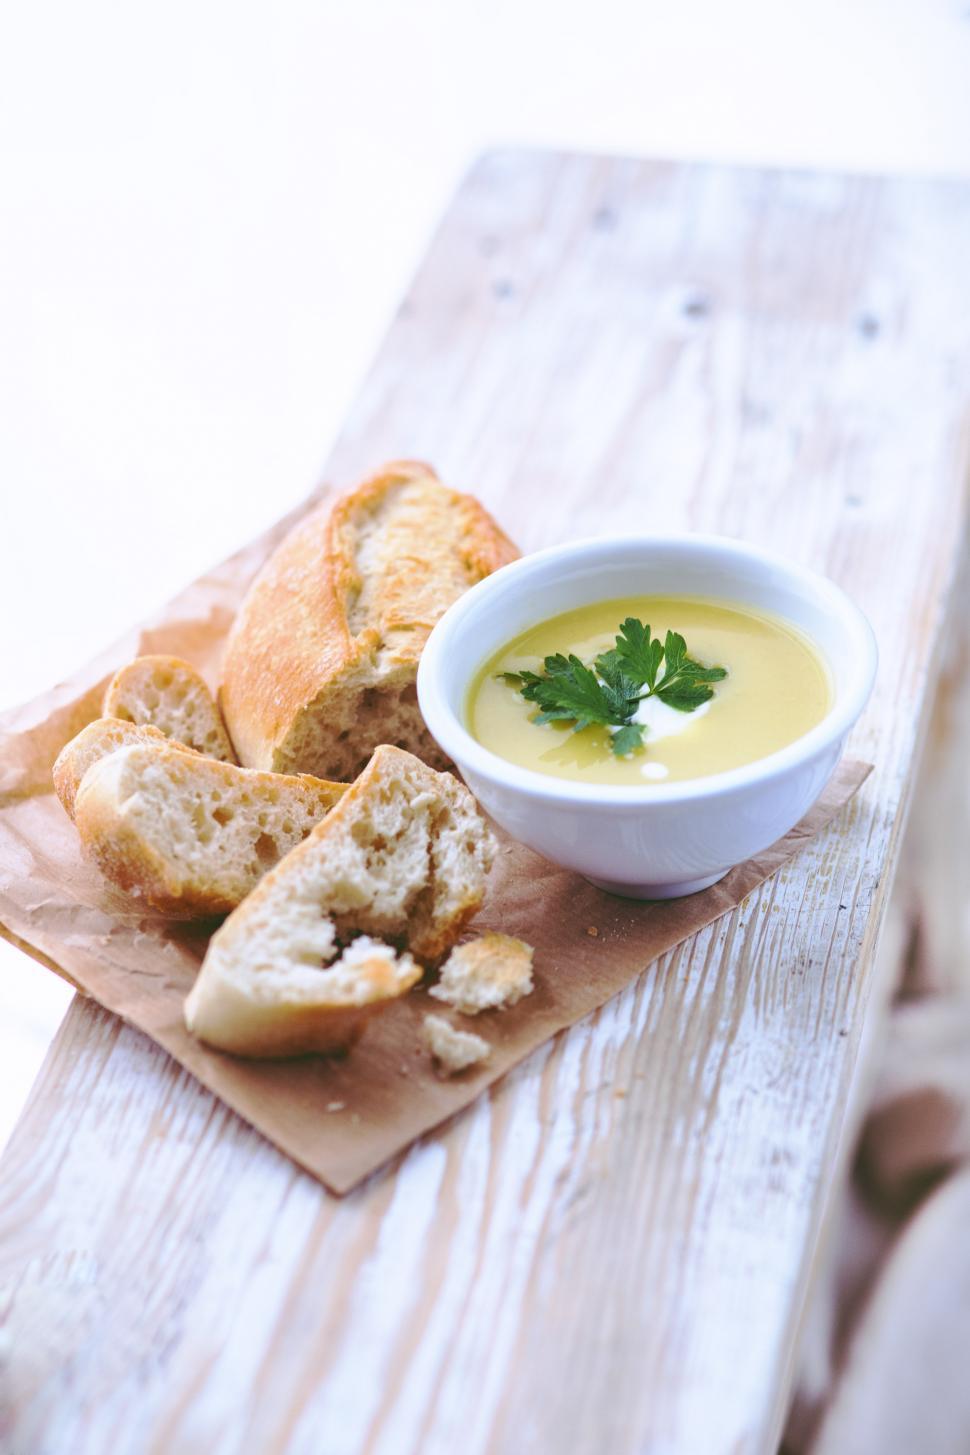 Free Image of A Bowl of Soup and Some Bread on a Table 